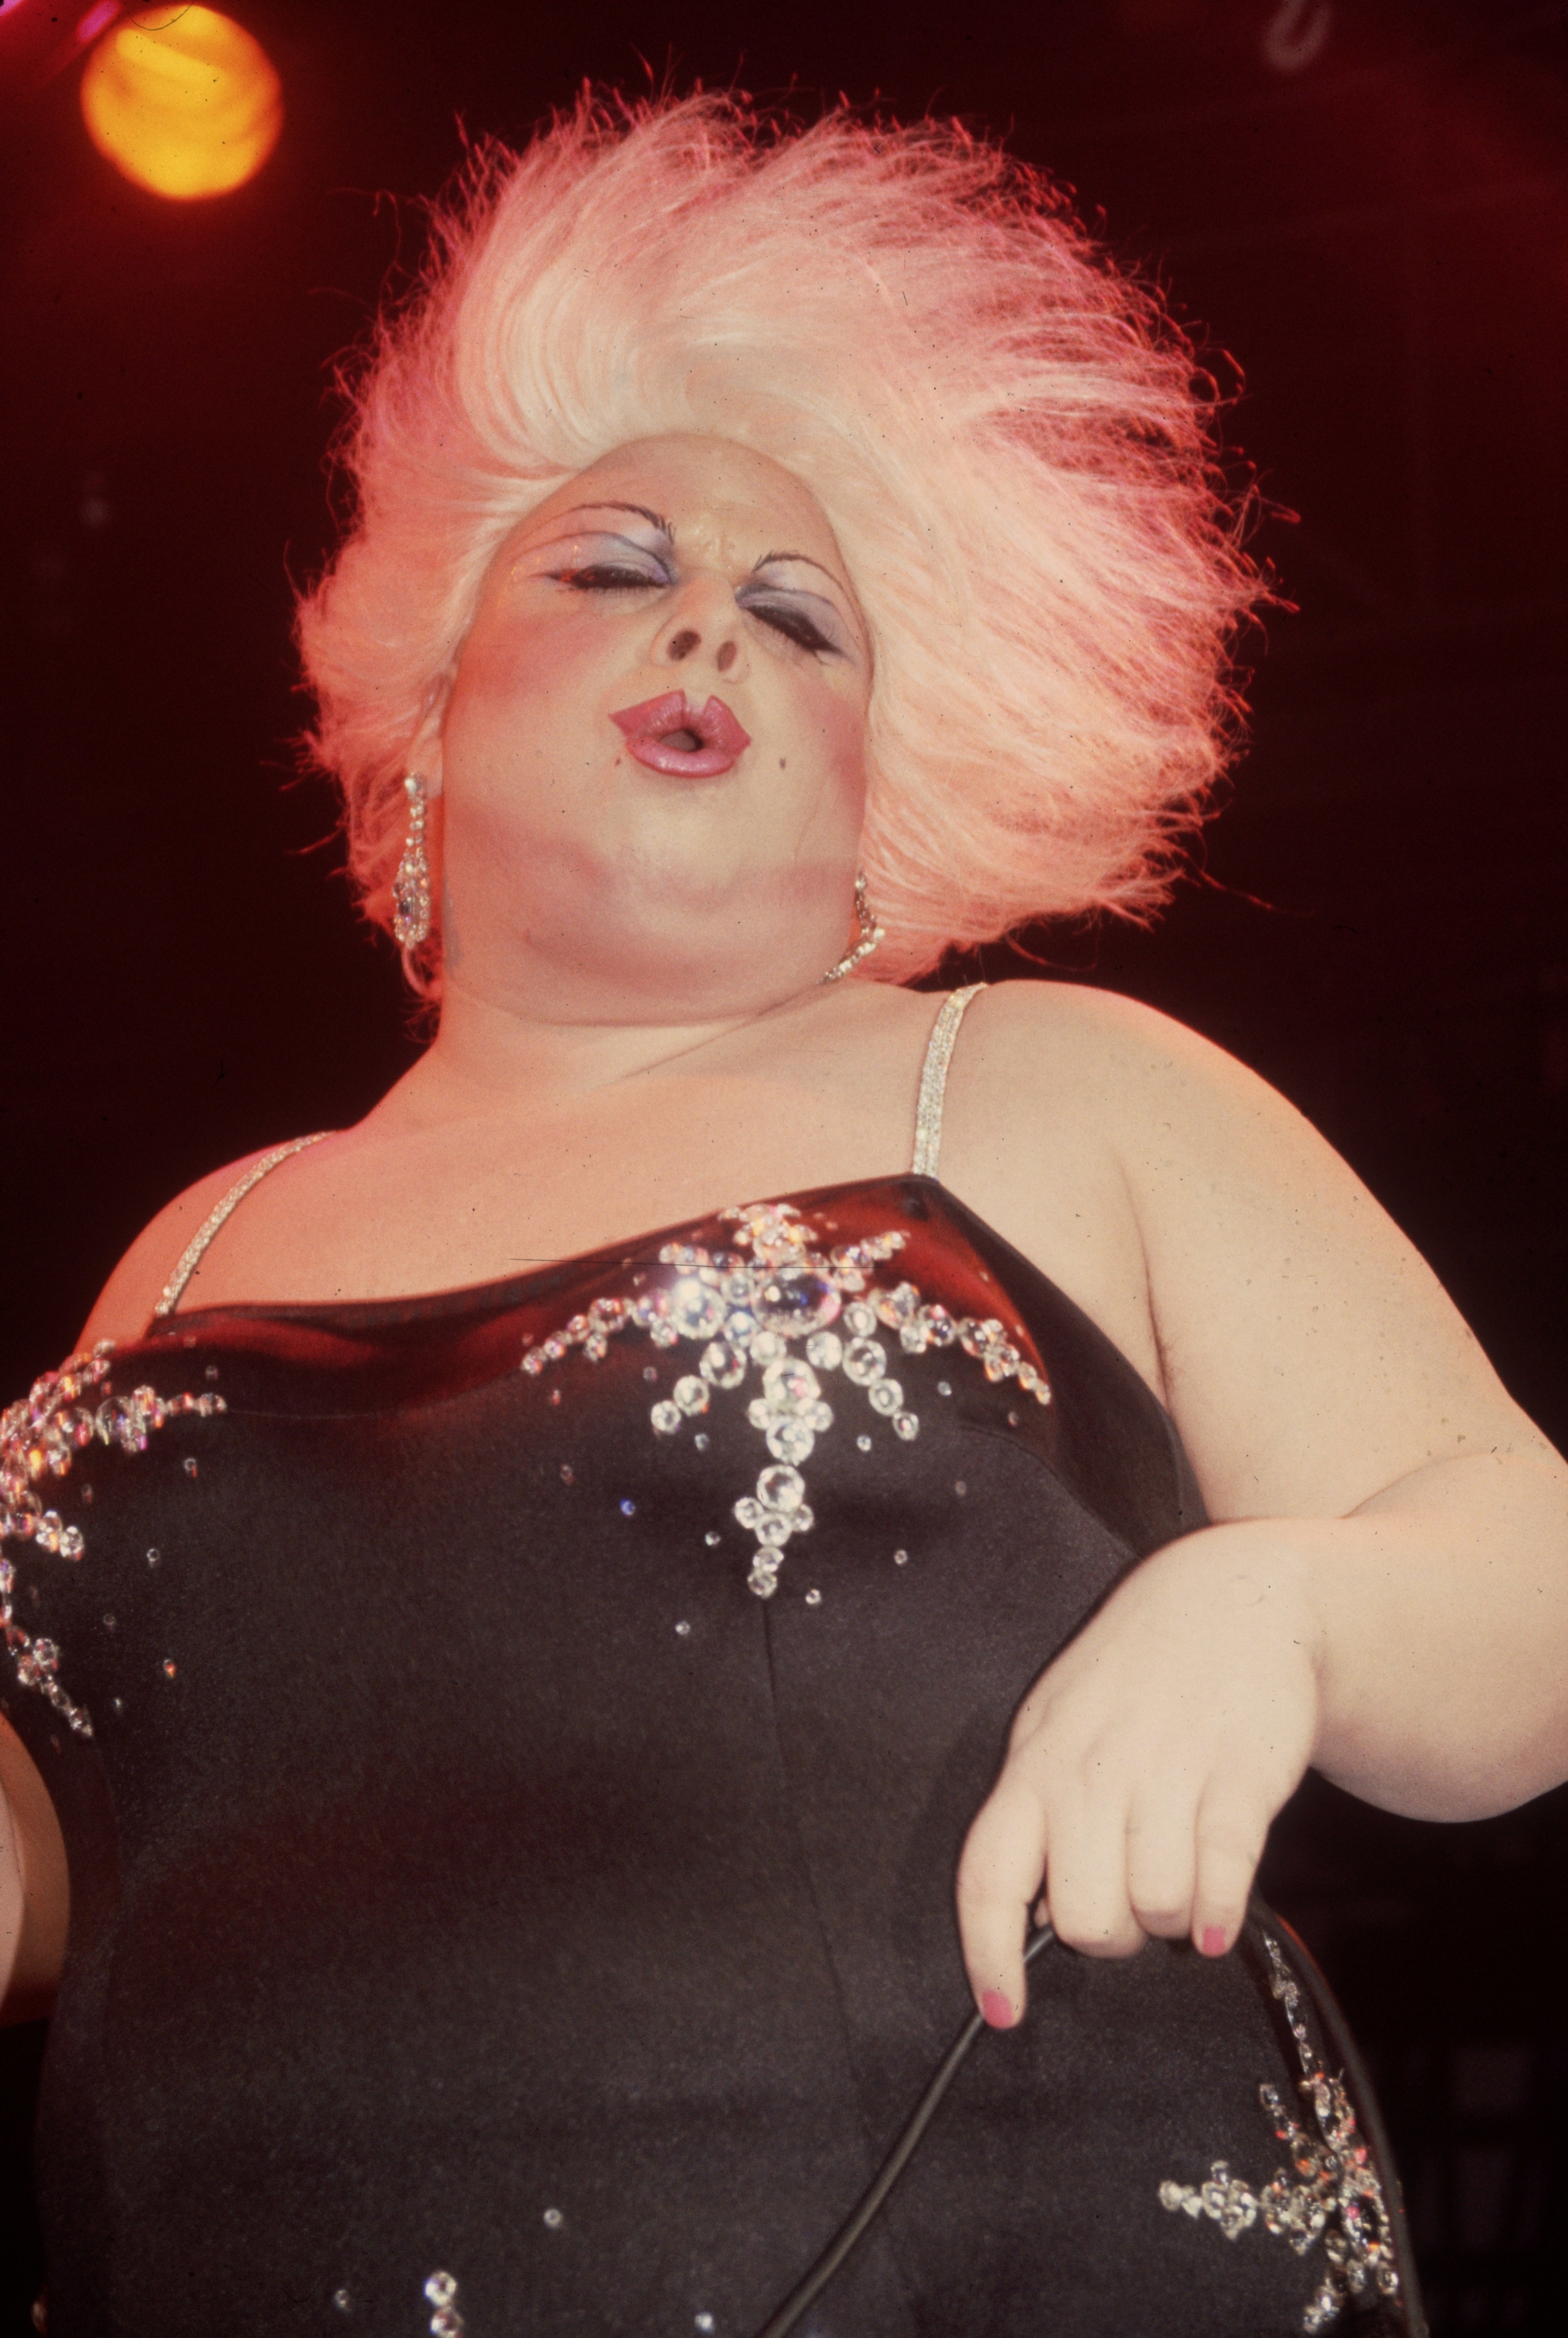 Divine performing on stage